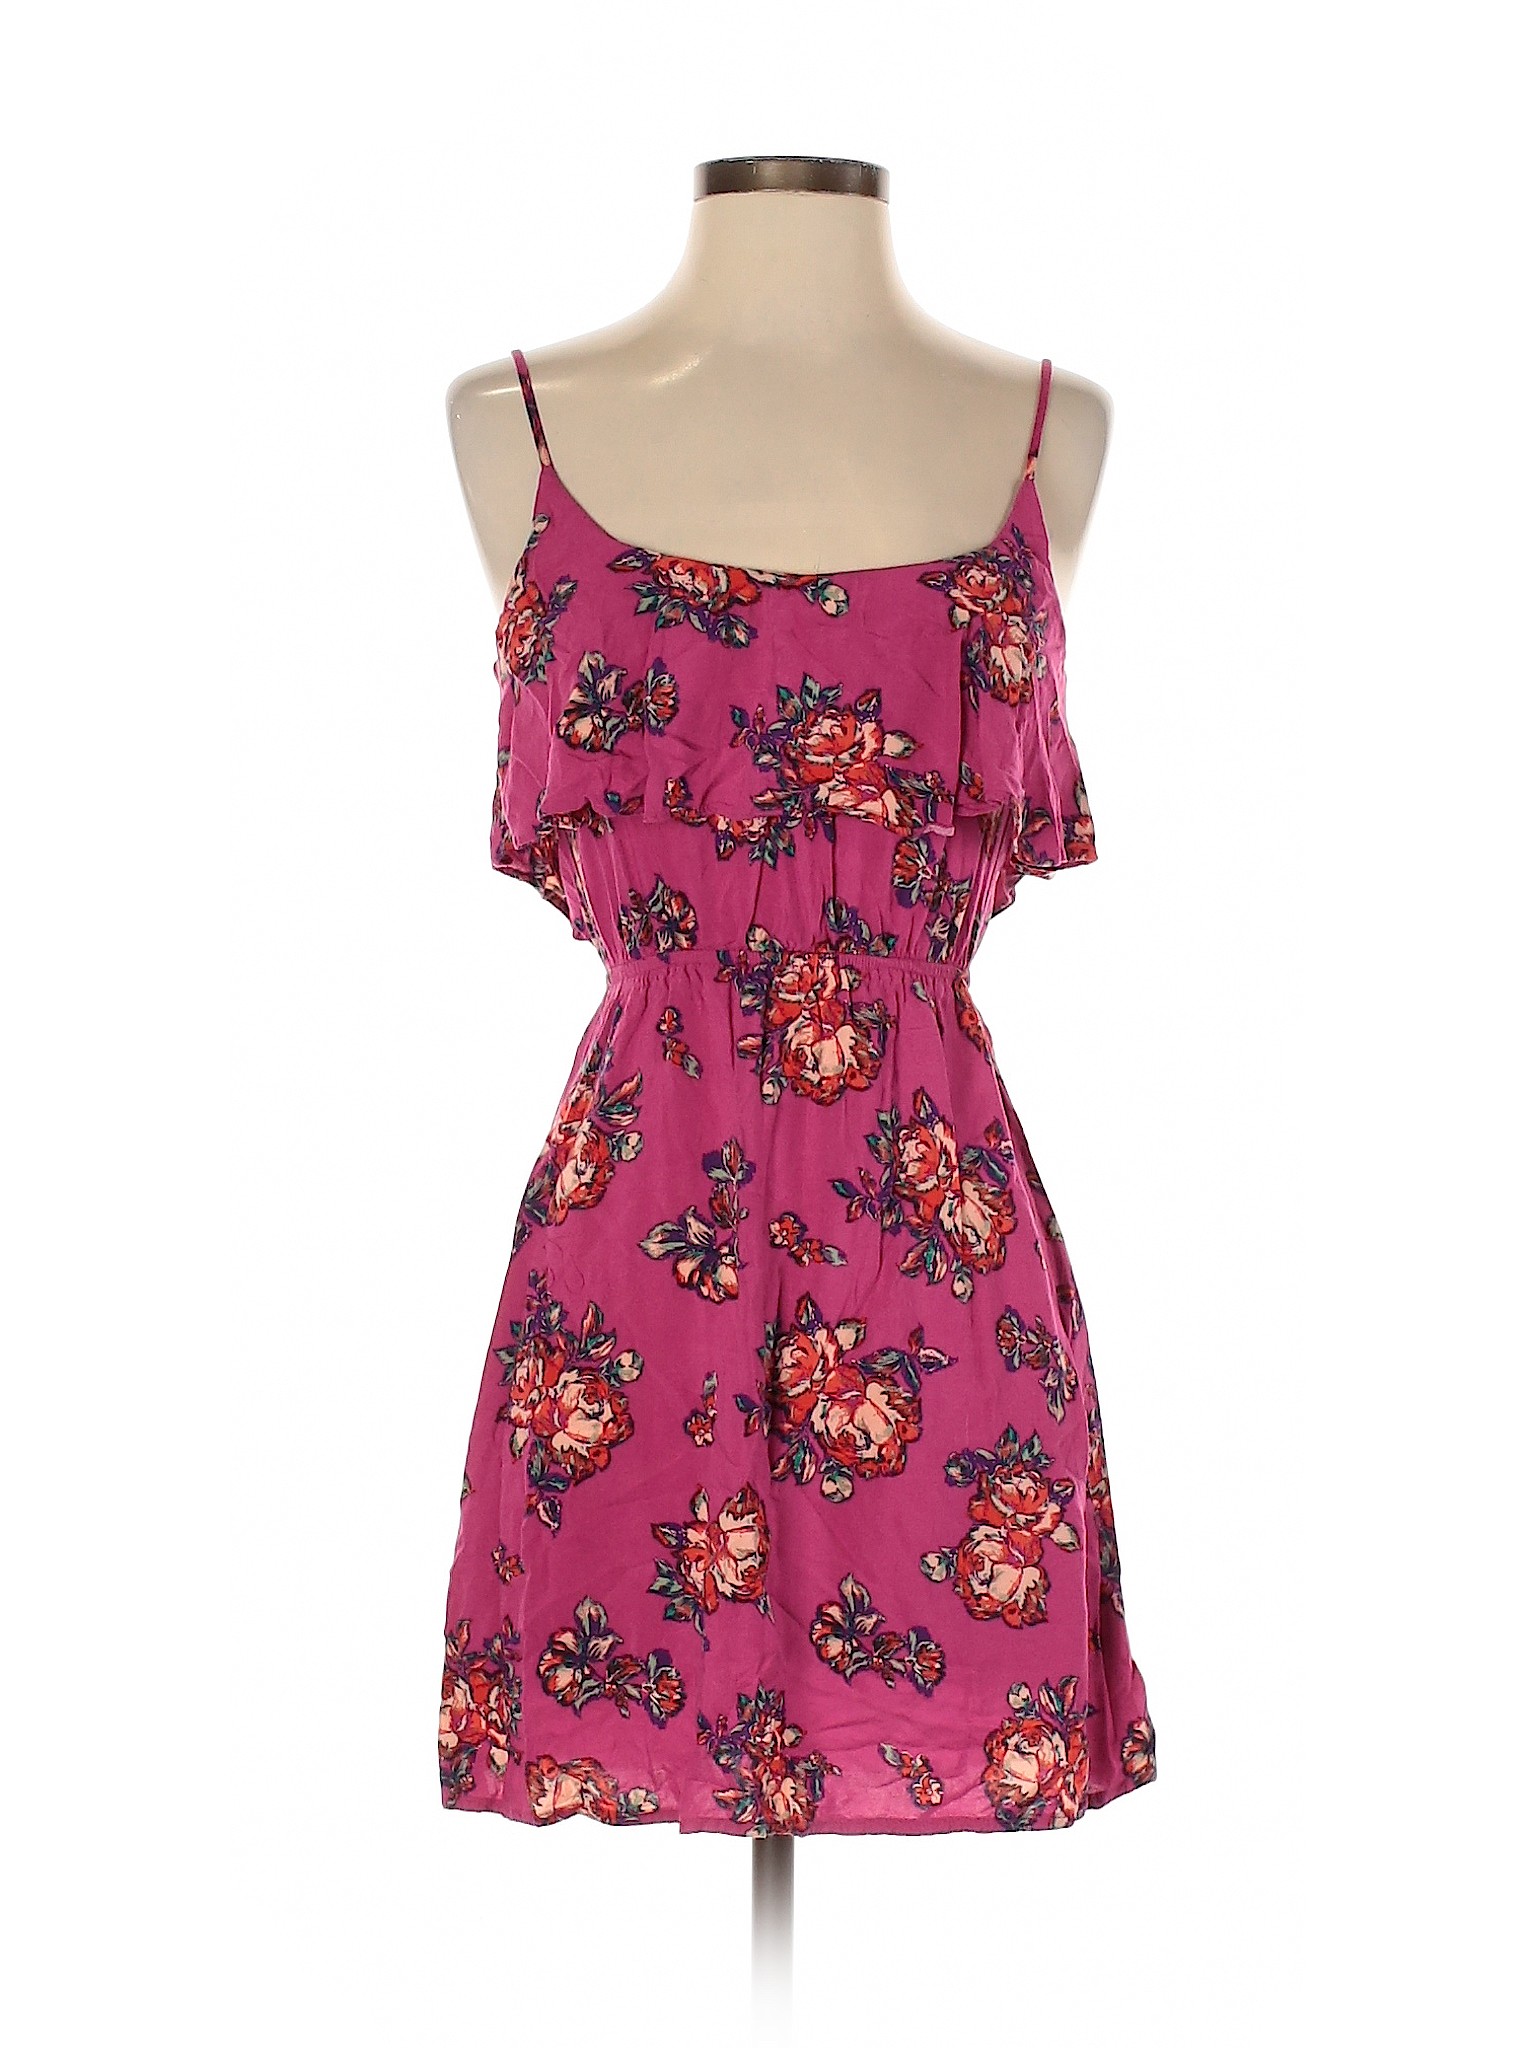 Roxy 100% Rayon Floral Pink Casual Dress Size XS - 89% off | thredUP